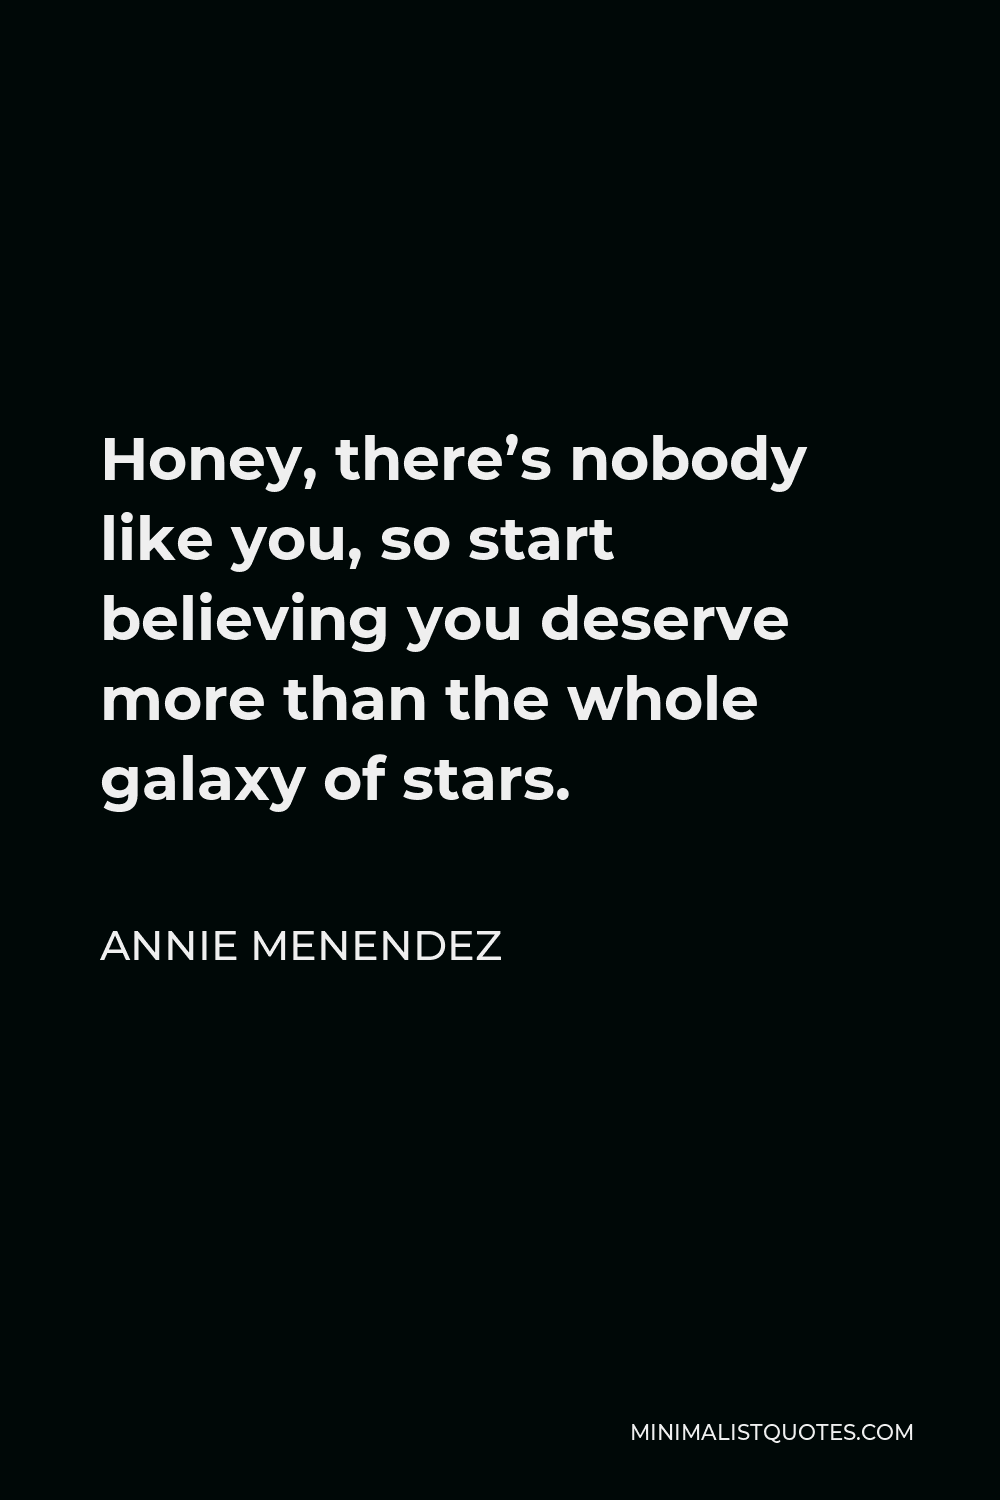 Annie Menendez Quote - Honey, there’s nobody like you, so start believing you deserve more than the whole galaxy of stars.